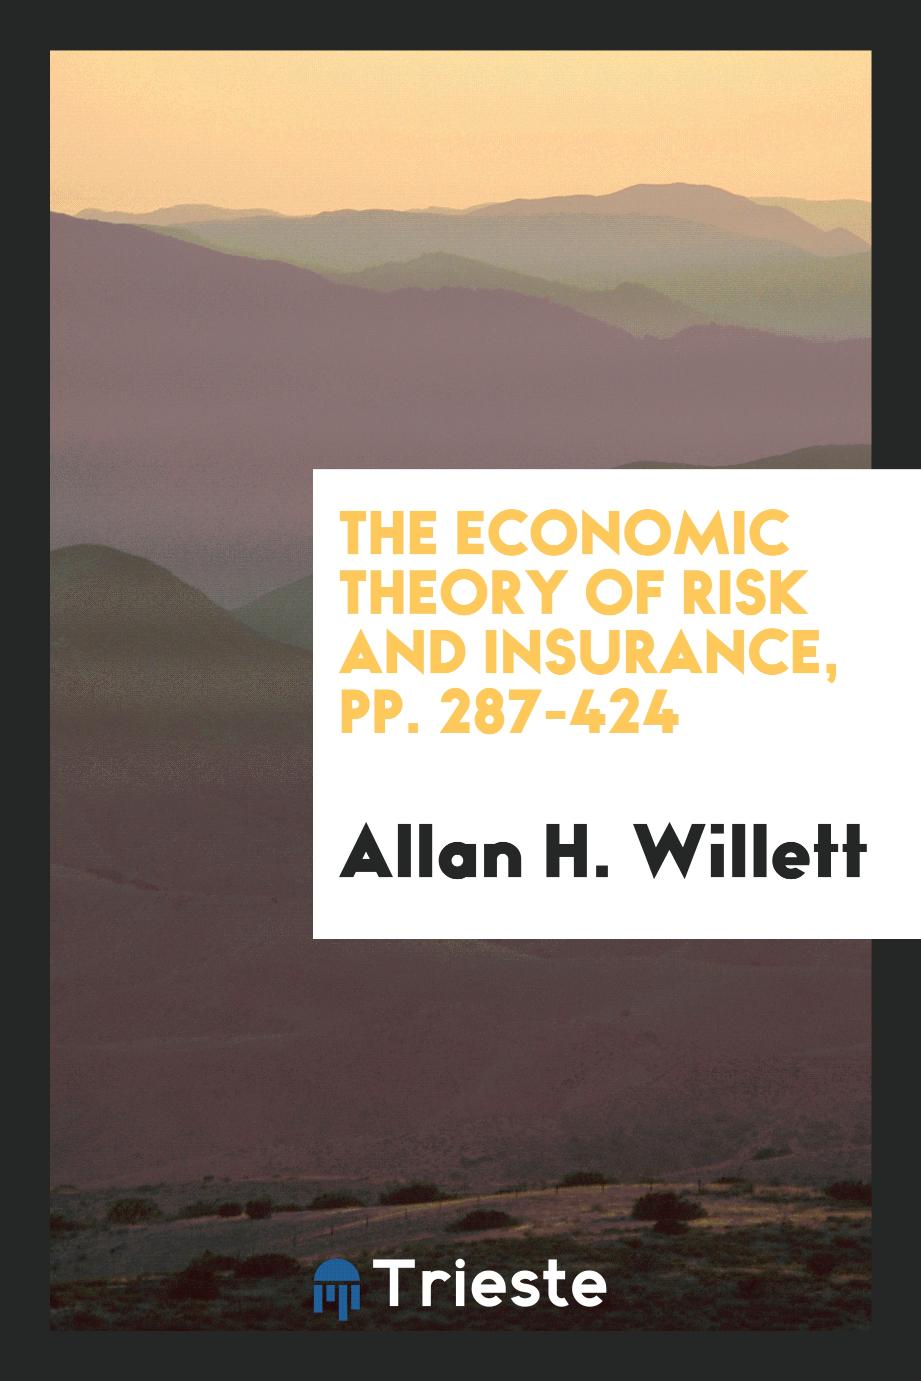 The Economic Theory of Risk and Insurance, pp. 287-424